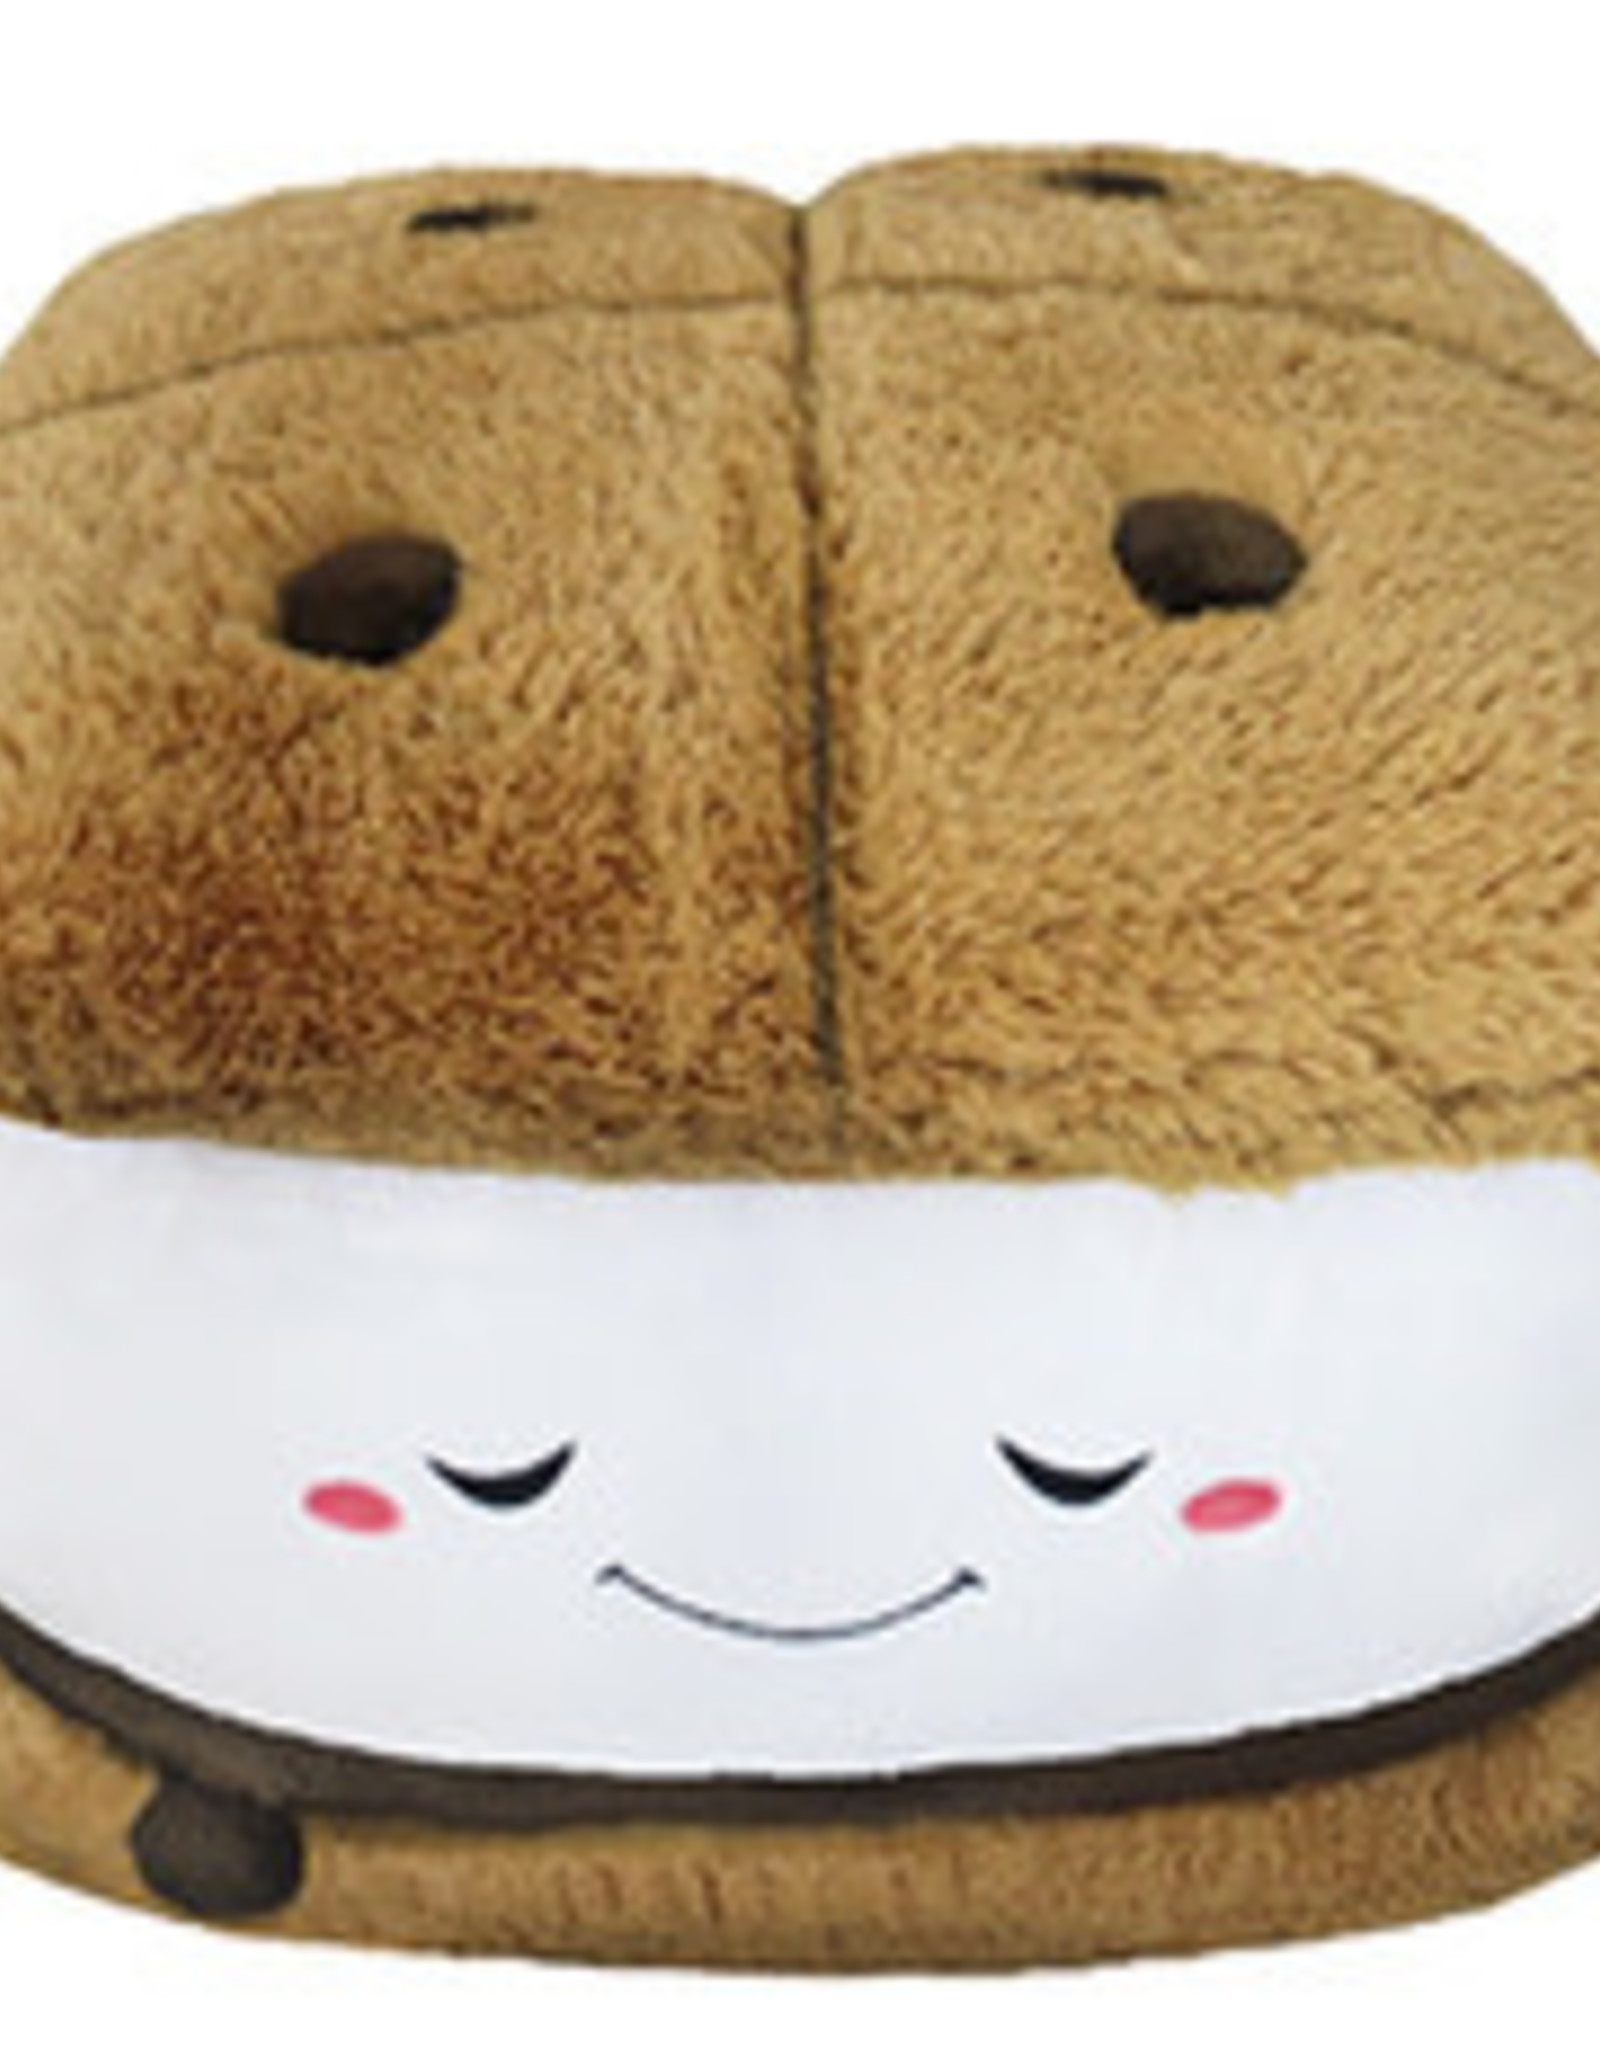 Squishable Comfort Food S'more